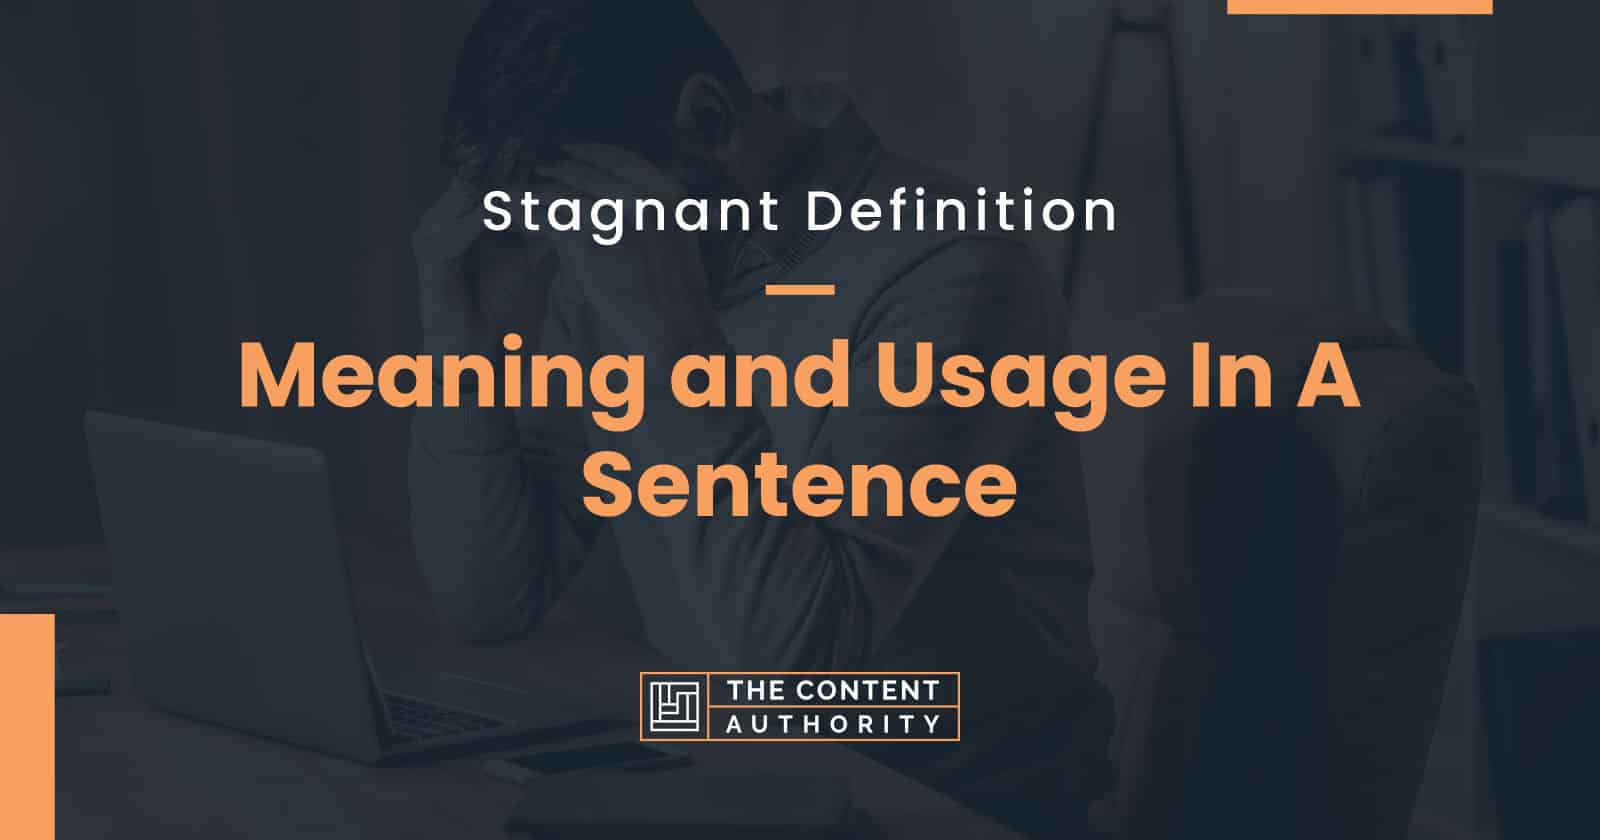 Stagnant Definition &#8211; Meaning And Usage In A Sentence